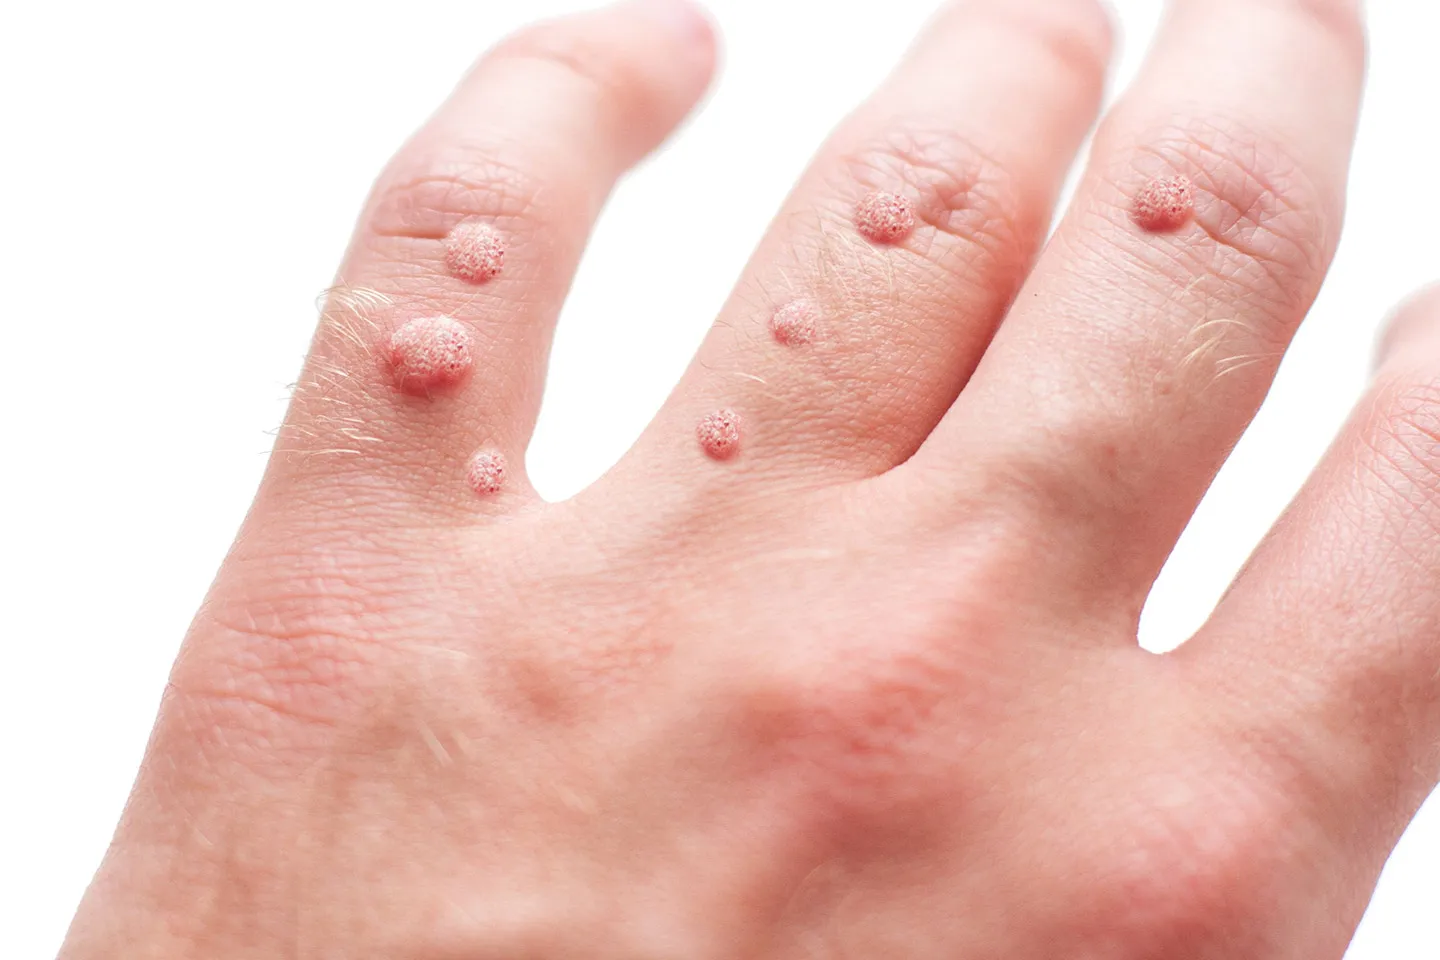 Small & grainy skin growths that occur most often on your fingers or hands.